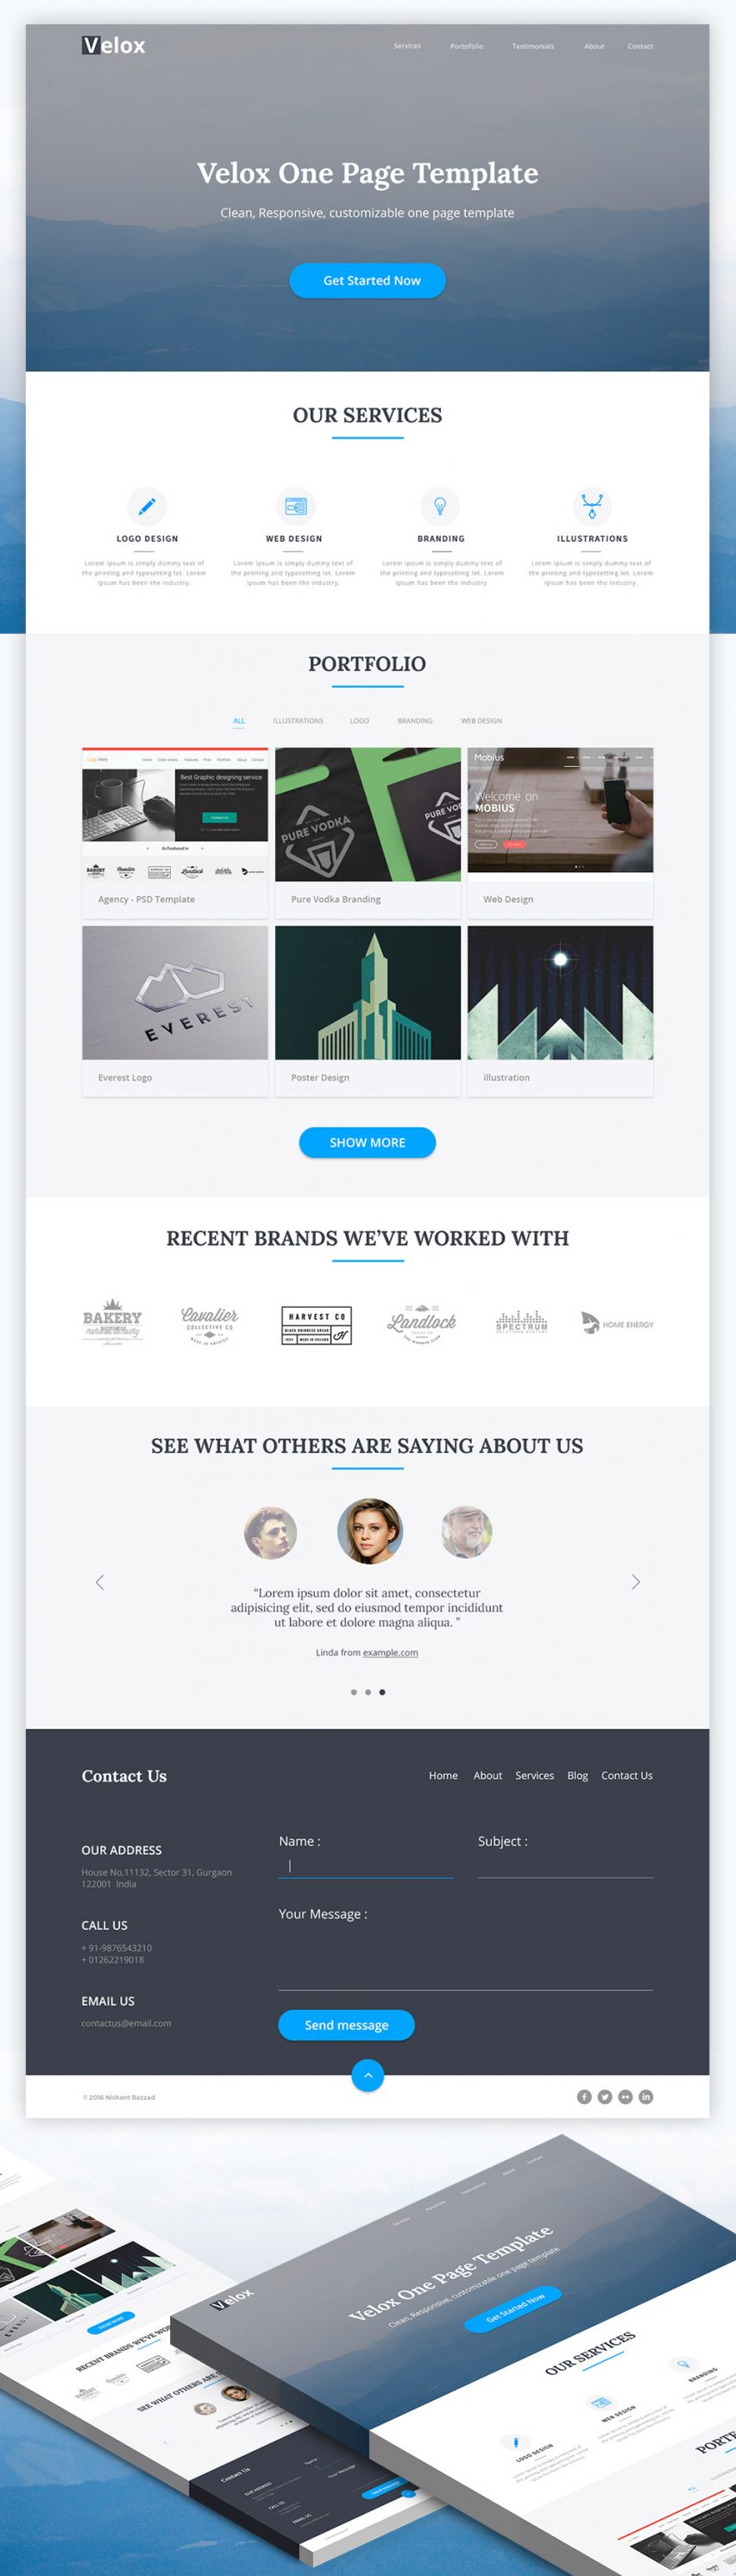 Responsive One Page Website Template for Creative Agencies